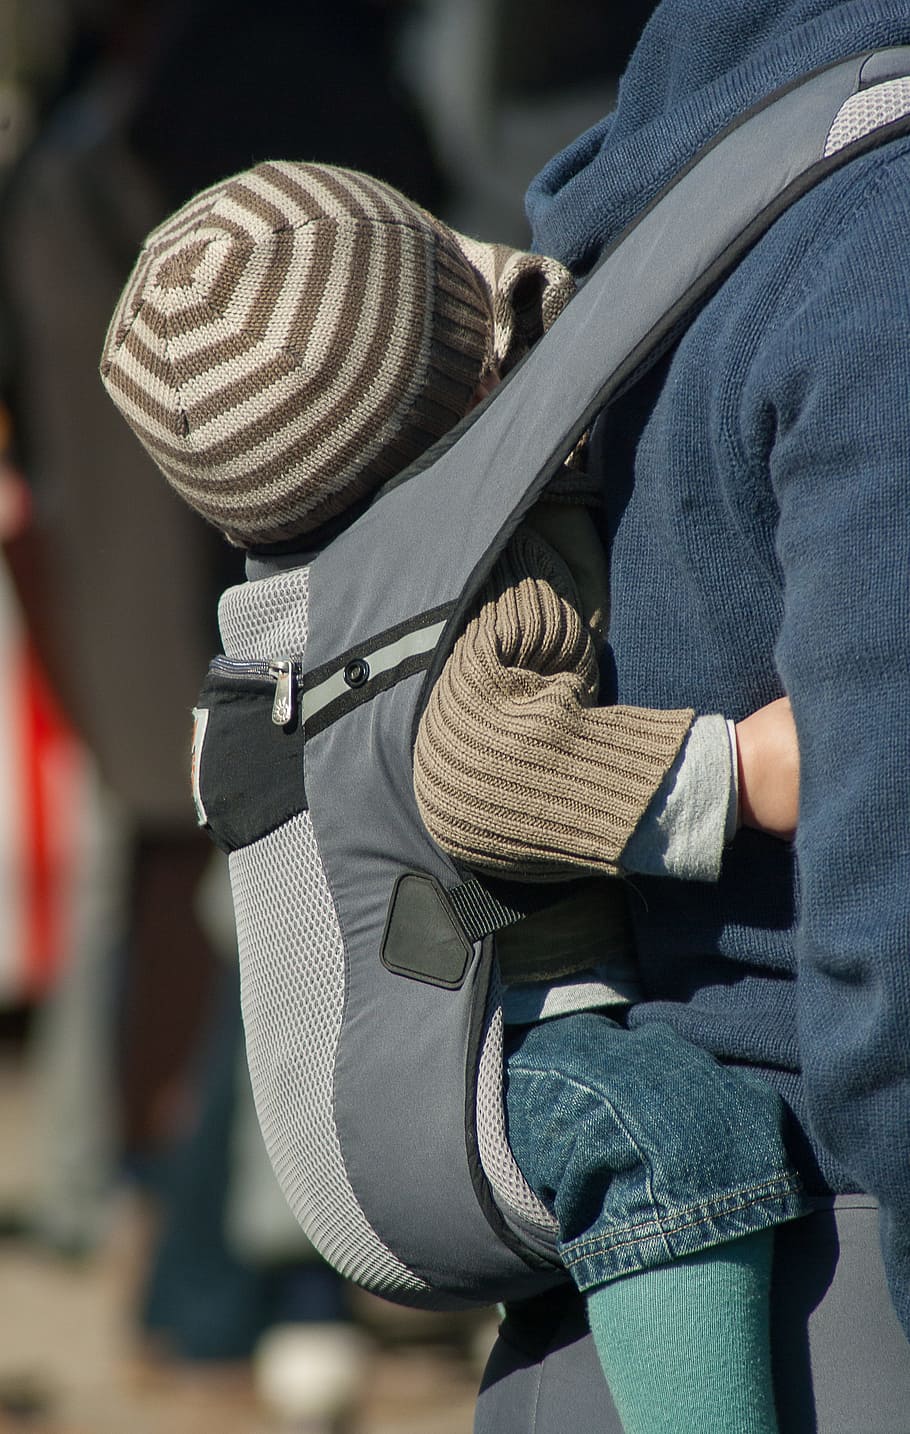 Baby Carrier, Baby, Transport, baby, transport, hat, rear view, cap, outdoors, day, people